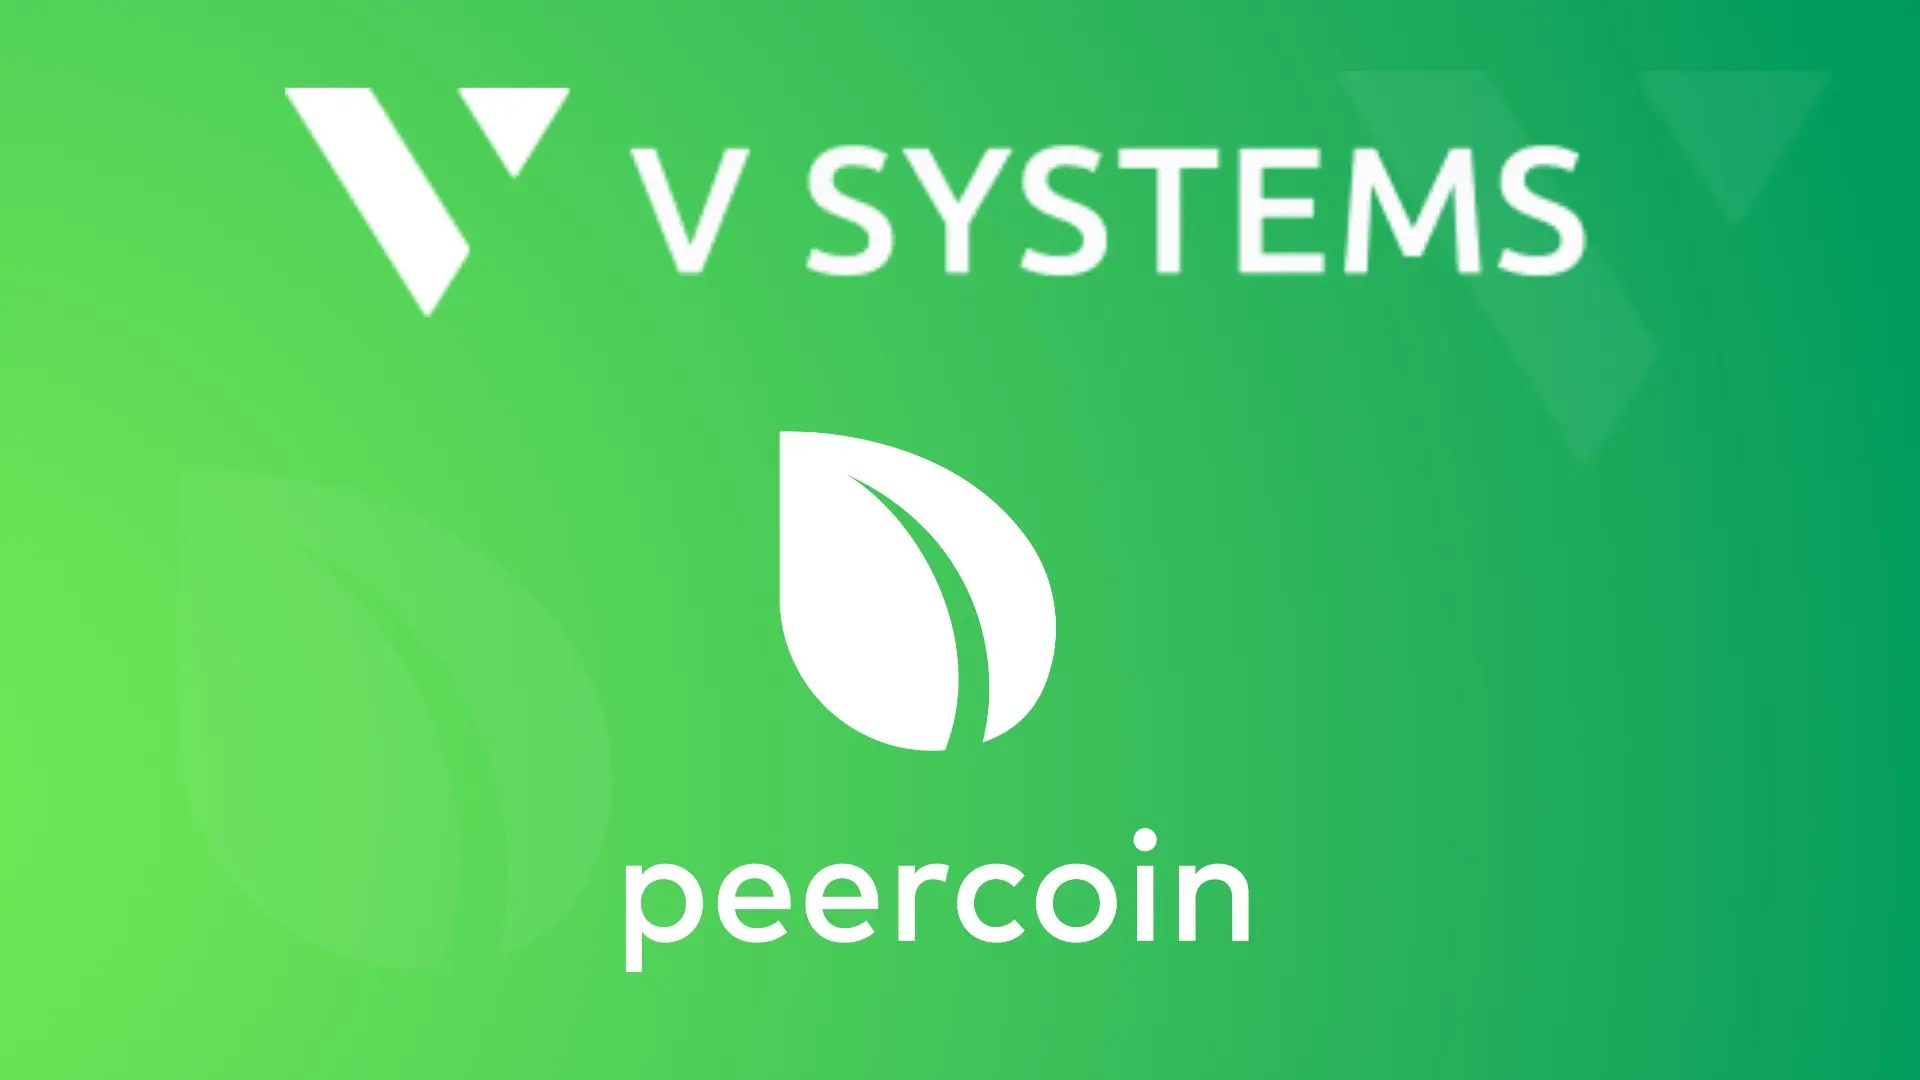 V SYSTEMS Mainnet Launched by Peercoin VPool